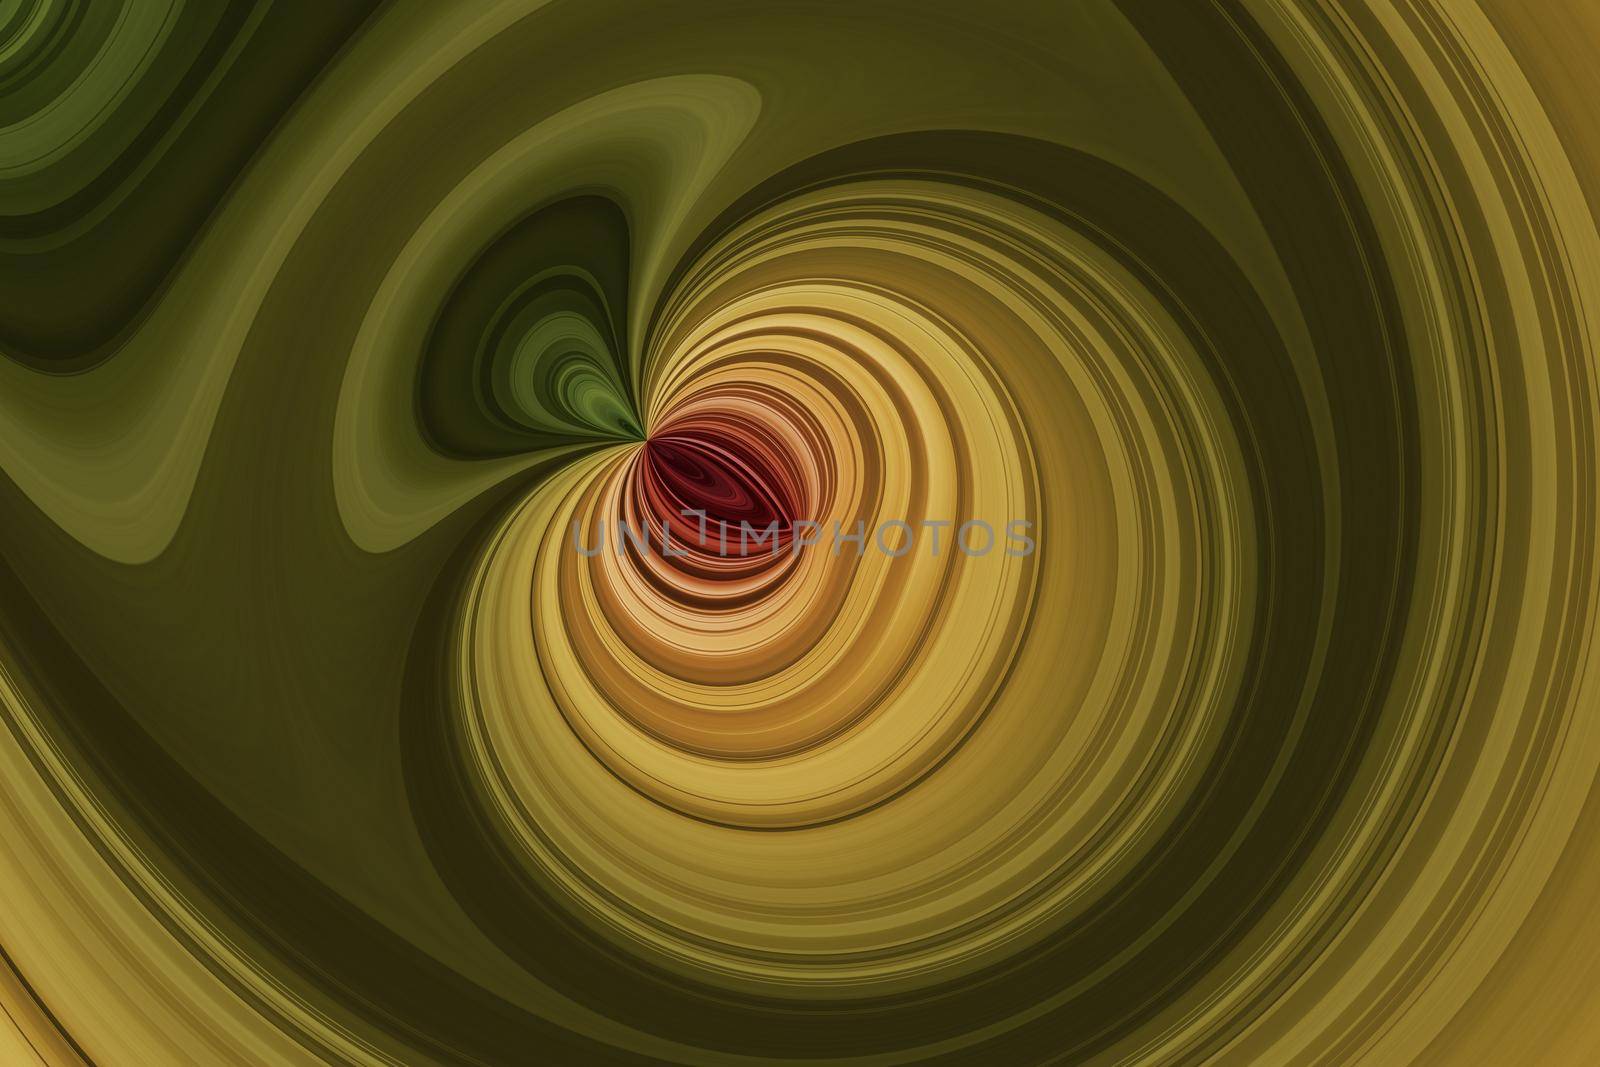 Green and yellow fancy swirling sphere with red core, bright abstract background